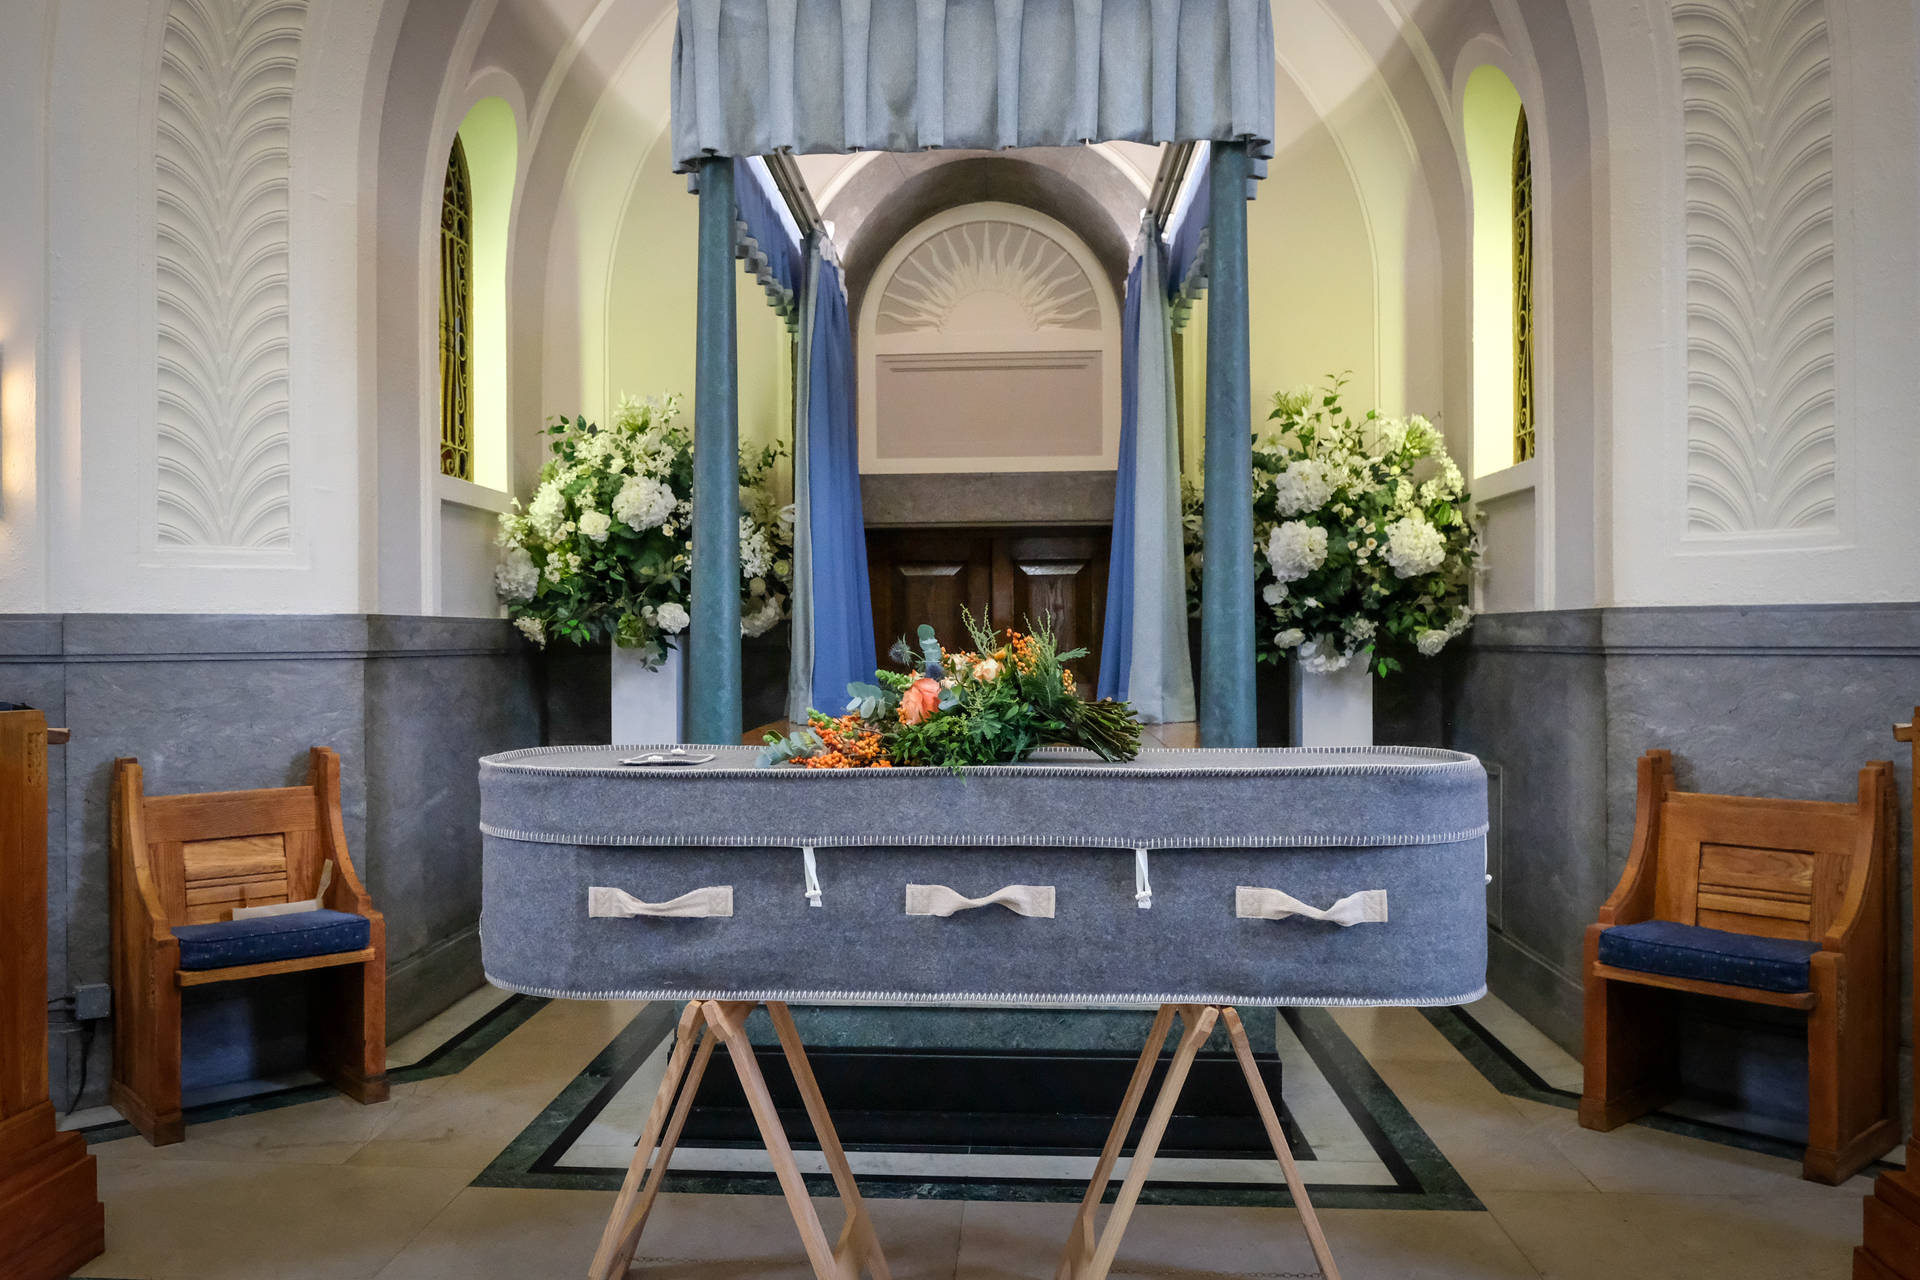 Wool Coffin Funeral